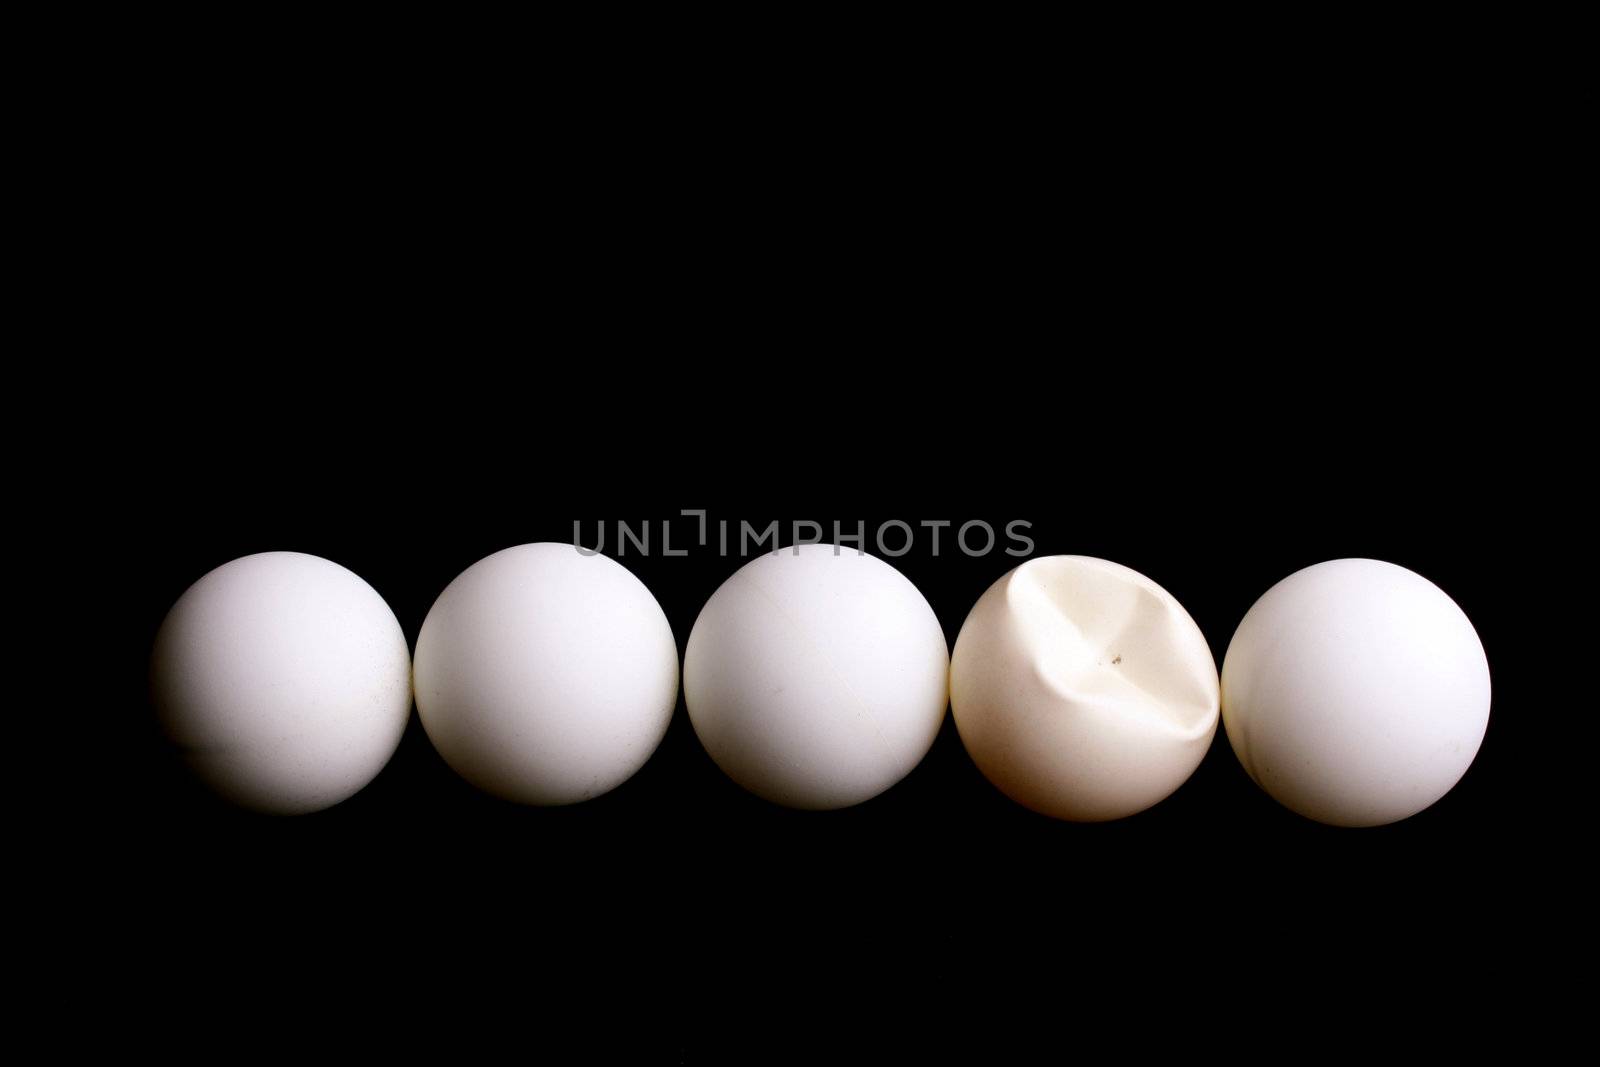 Five balls for game in table tennis on a black background. One ball is rumpled in game.